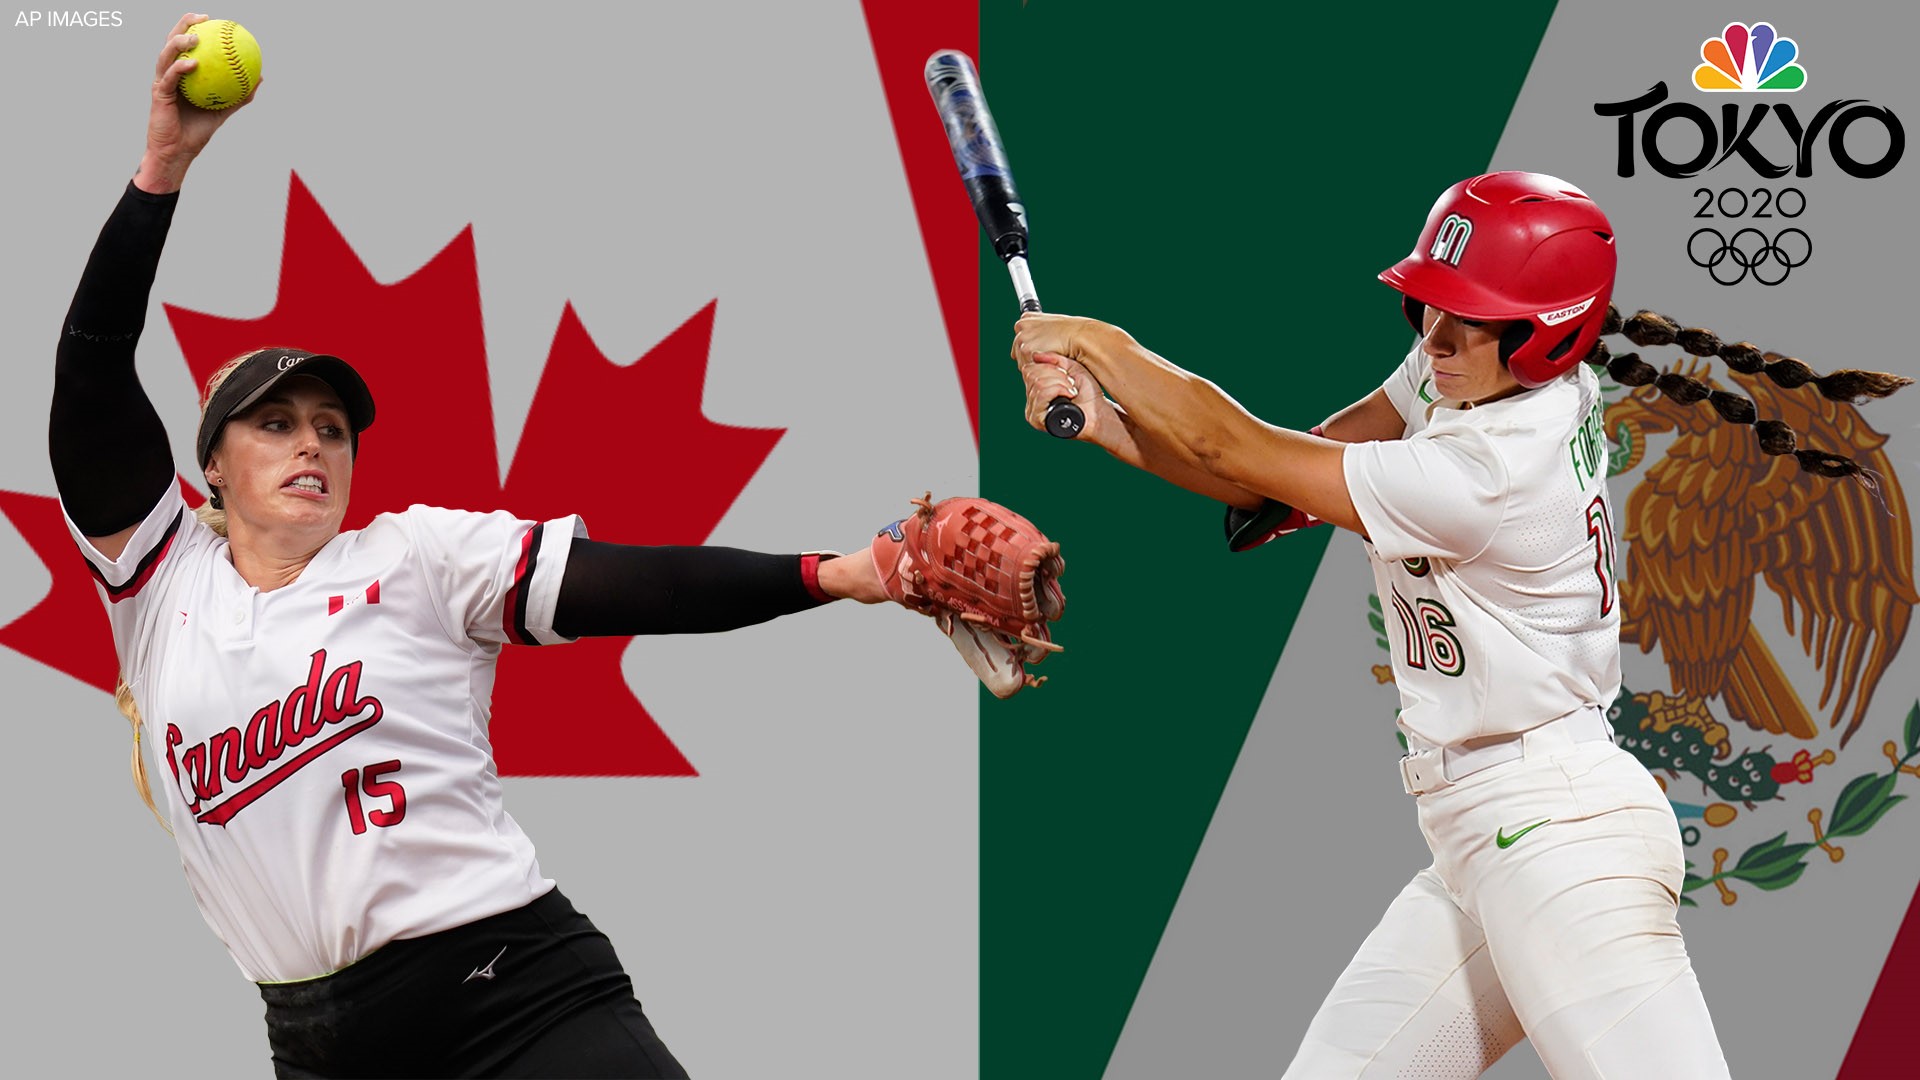 Danielle Lawrie, who pitches for Canada, and Tatyana Forbes, who's a left fielder for Mexico, will play against each other Monday night.